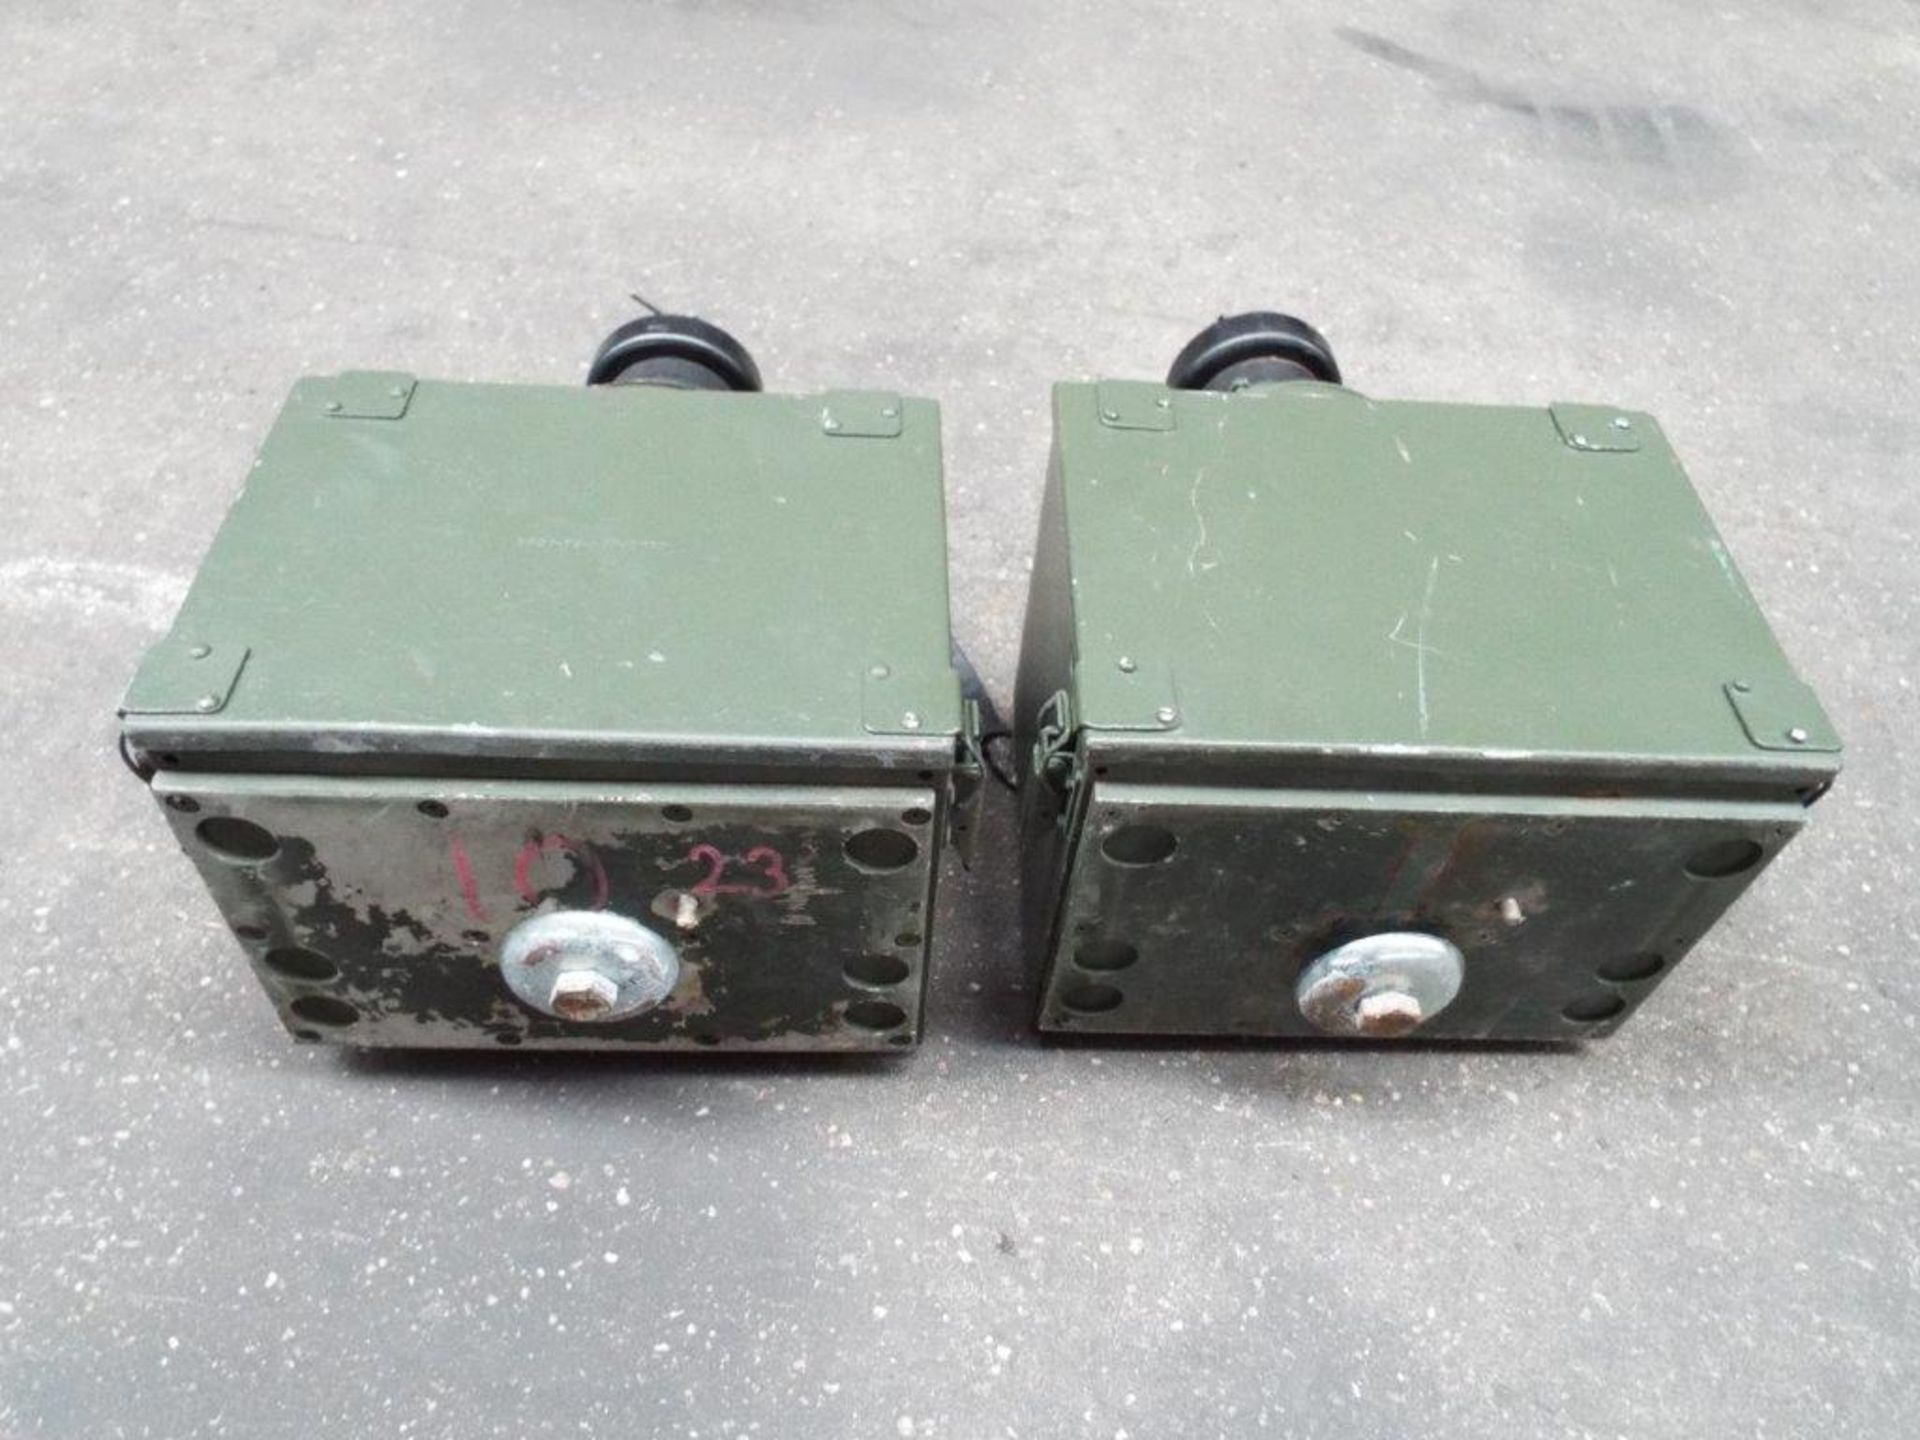 2 x Land Rover ATU Wing Boxes Complete with Aerial Bases and Tuaam's - Image 3 of 6